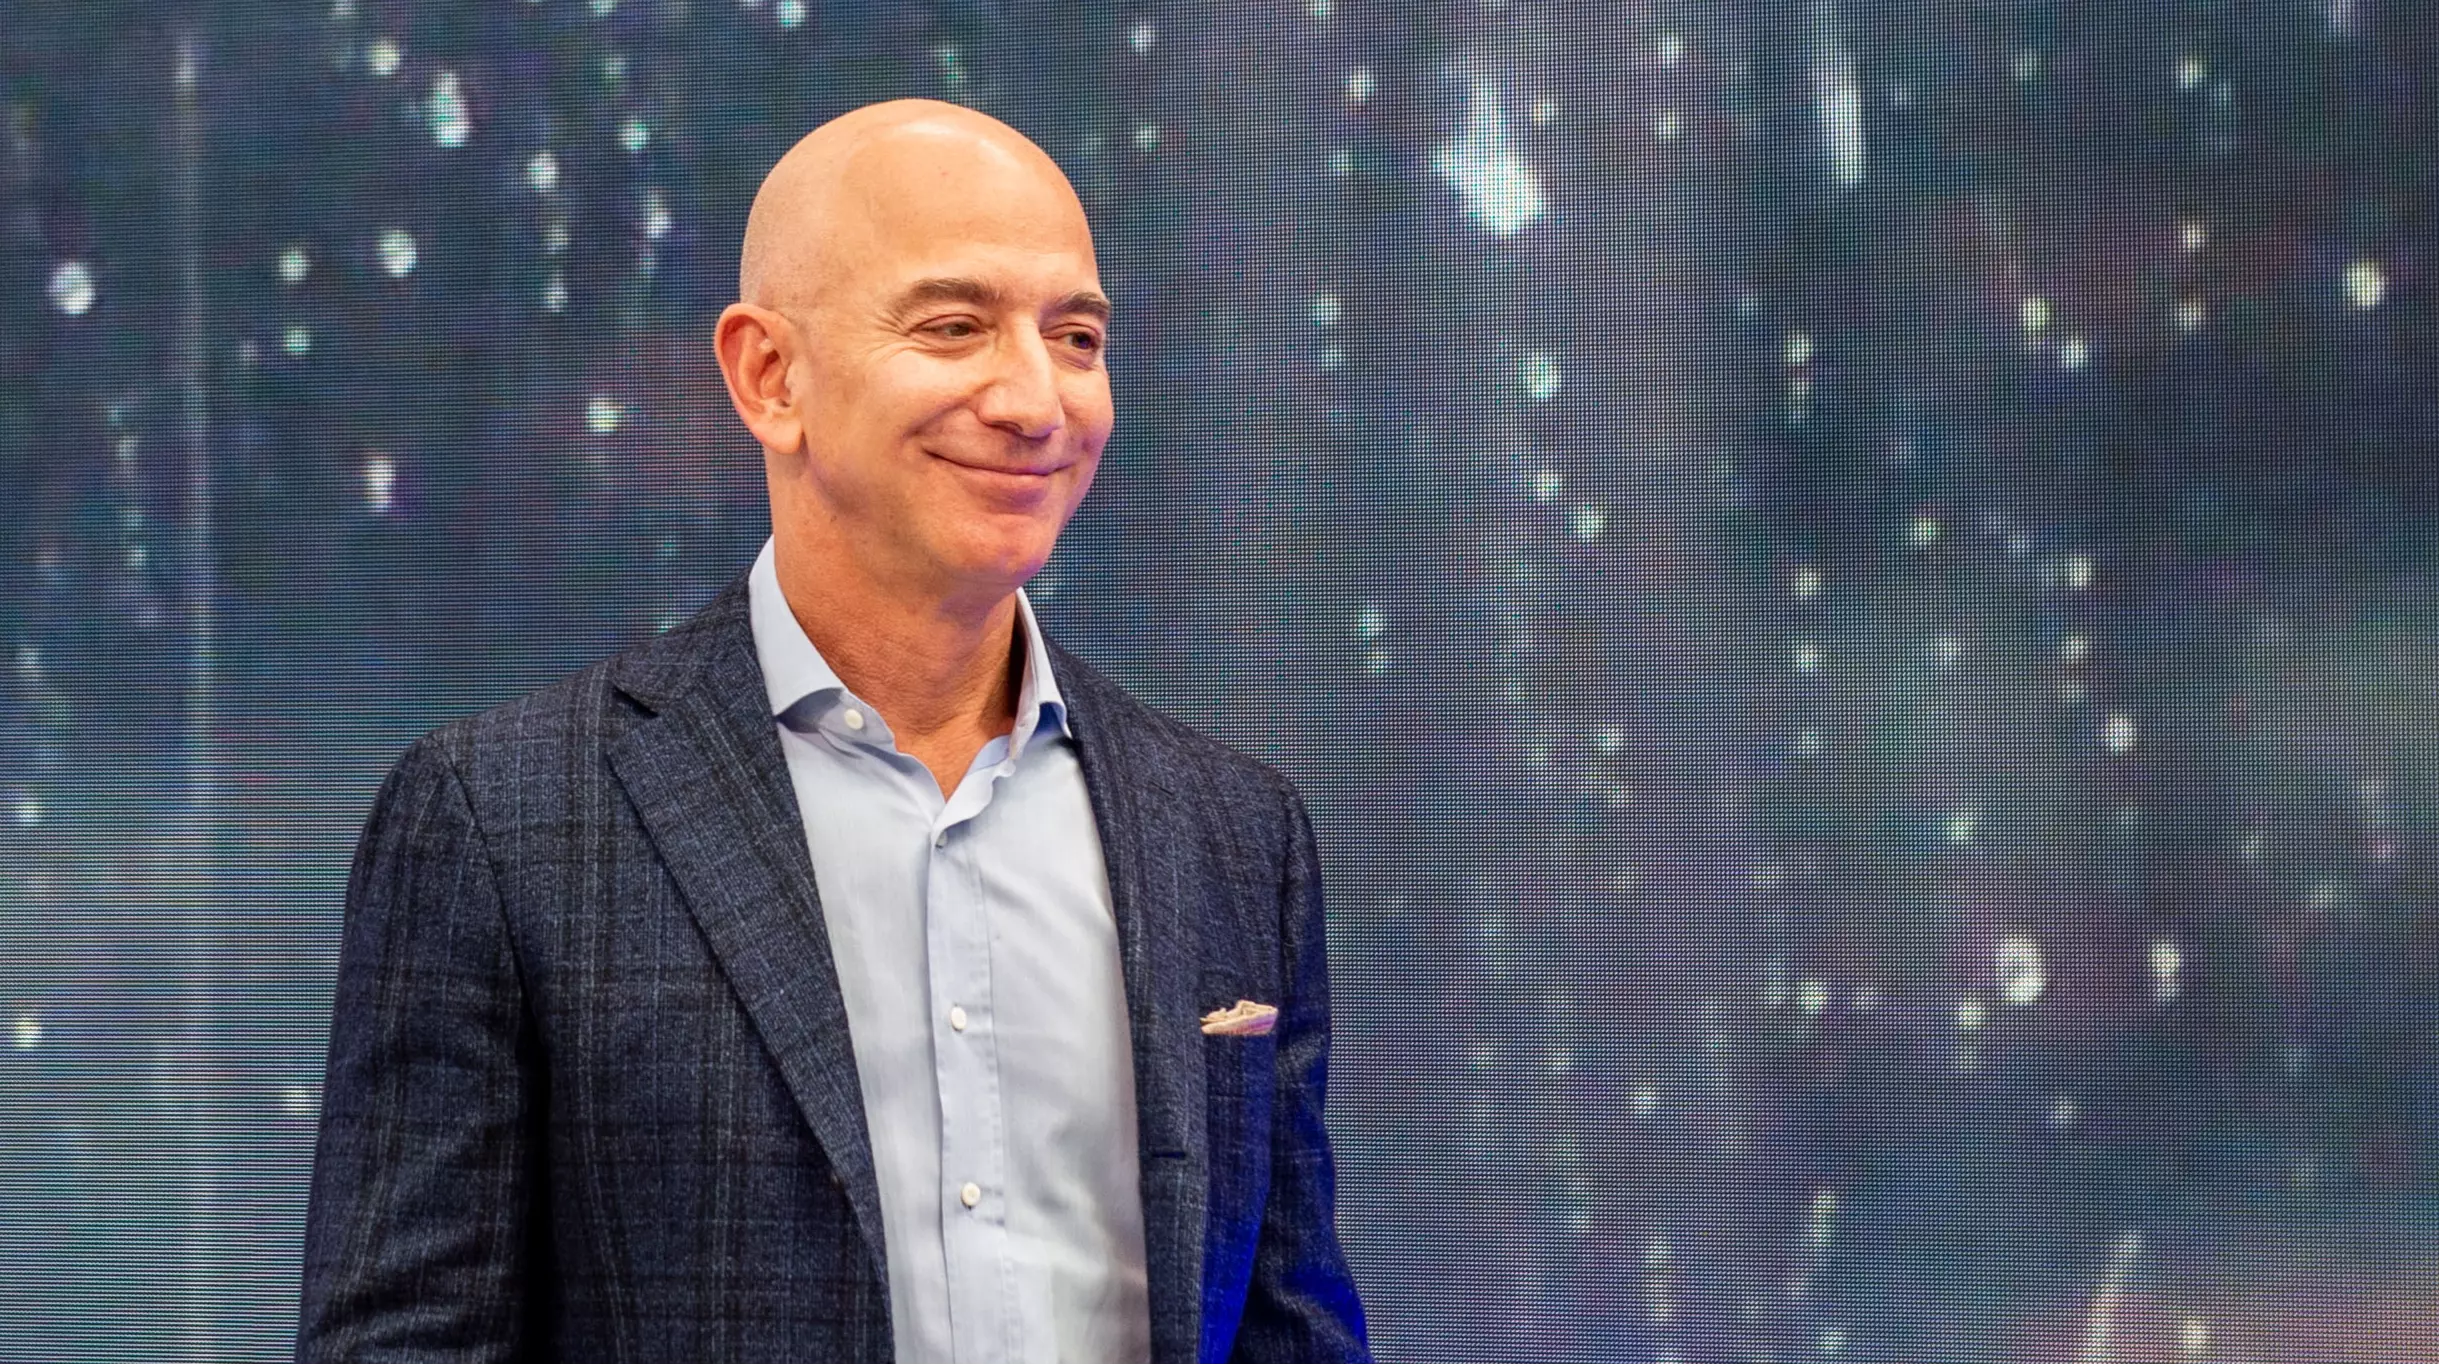 Jeff Bezos No Longer The Richest Man In The World